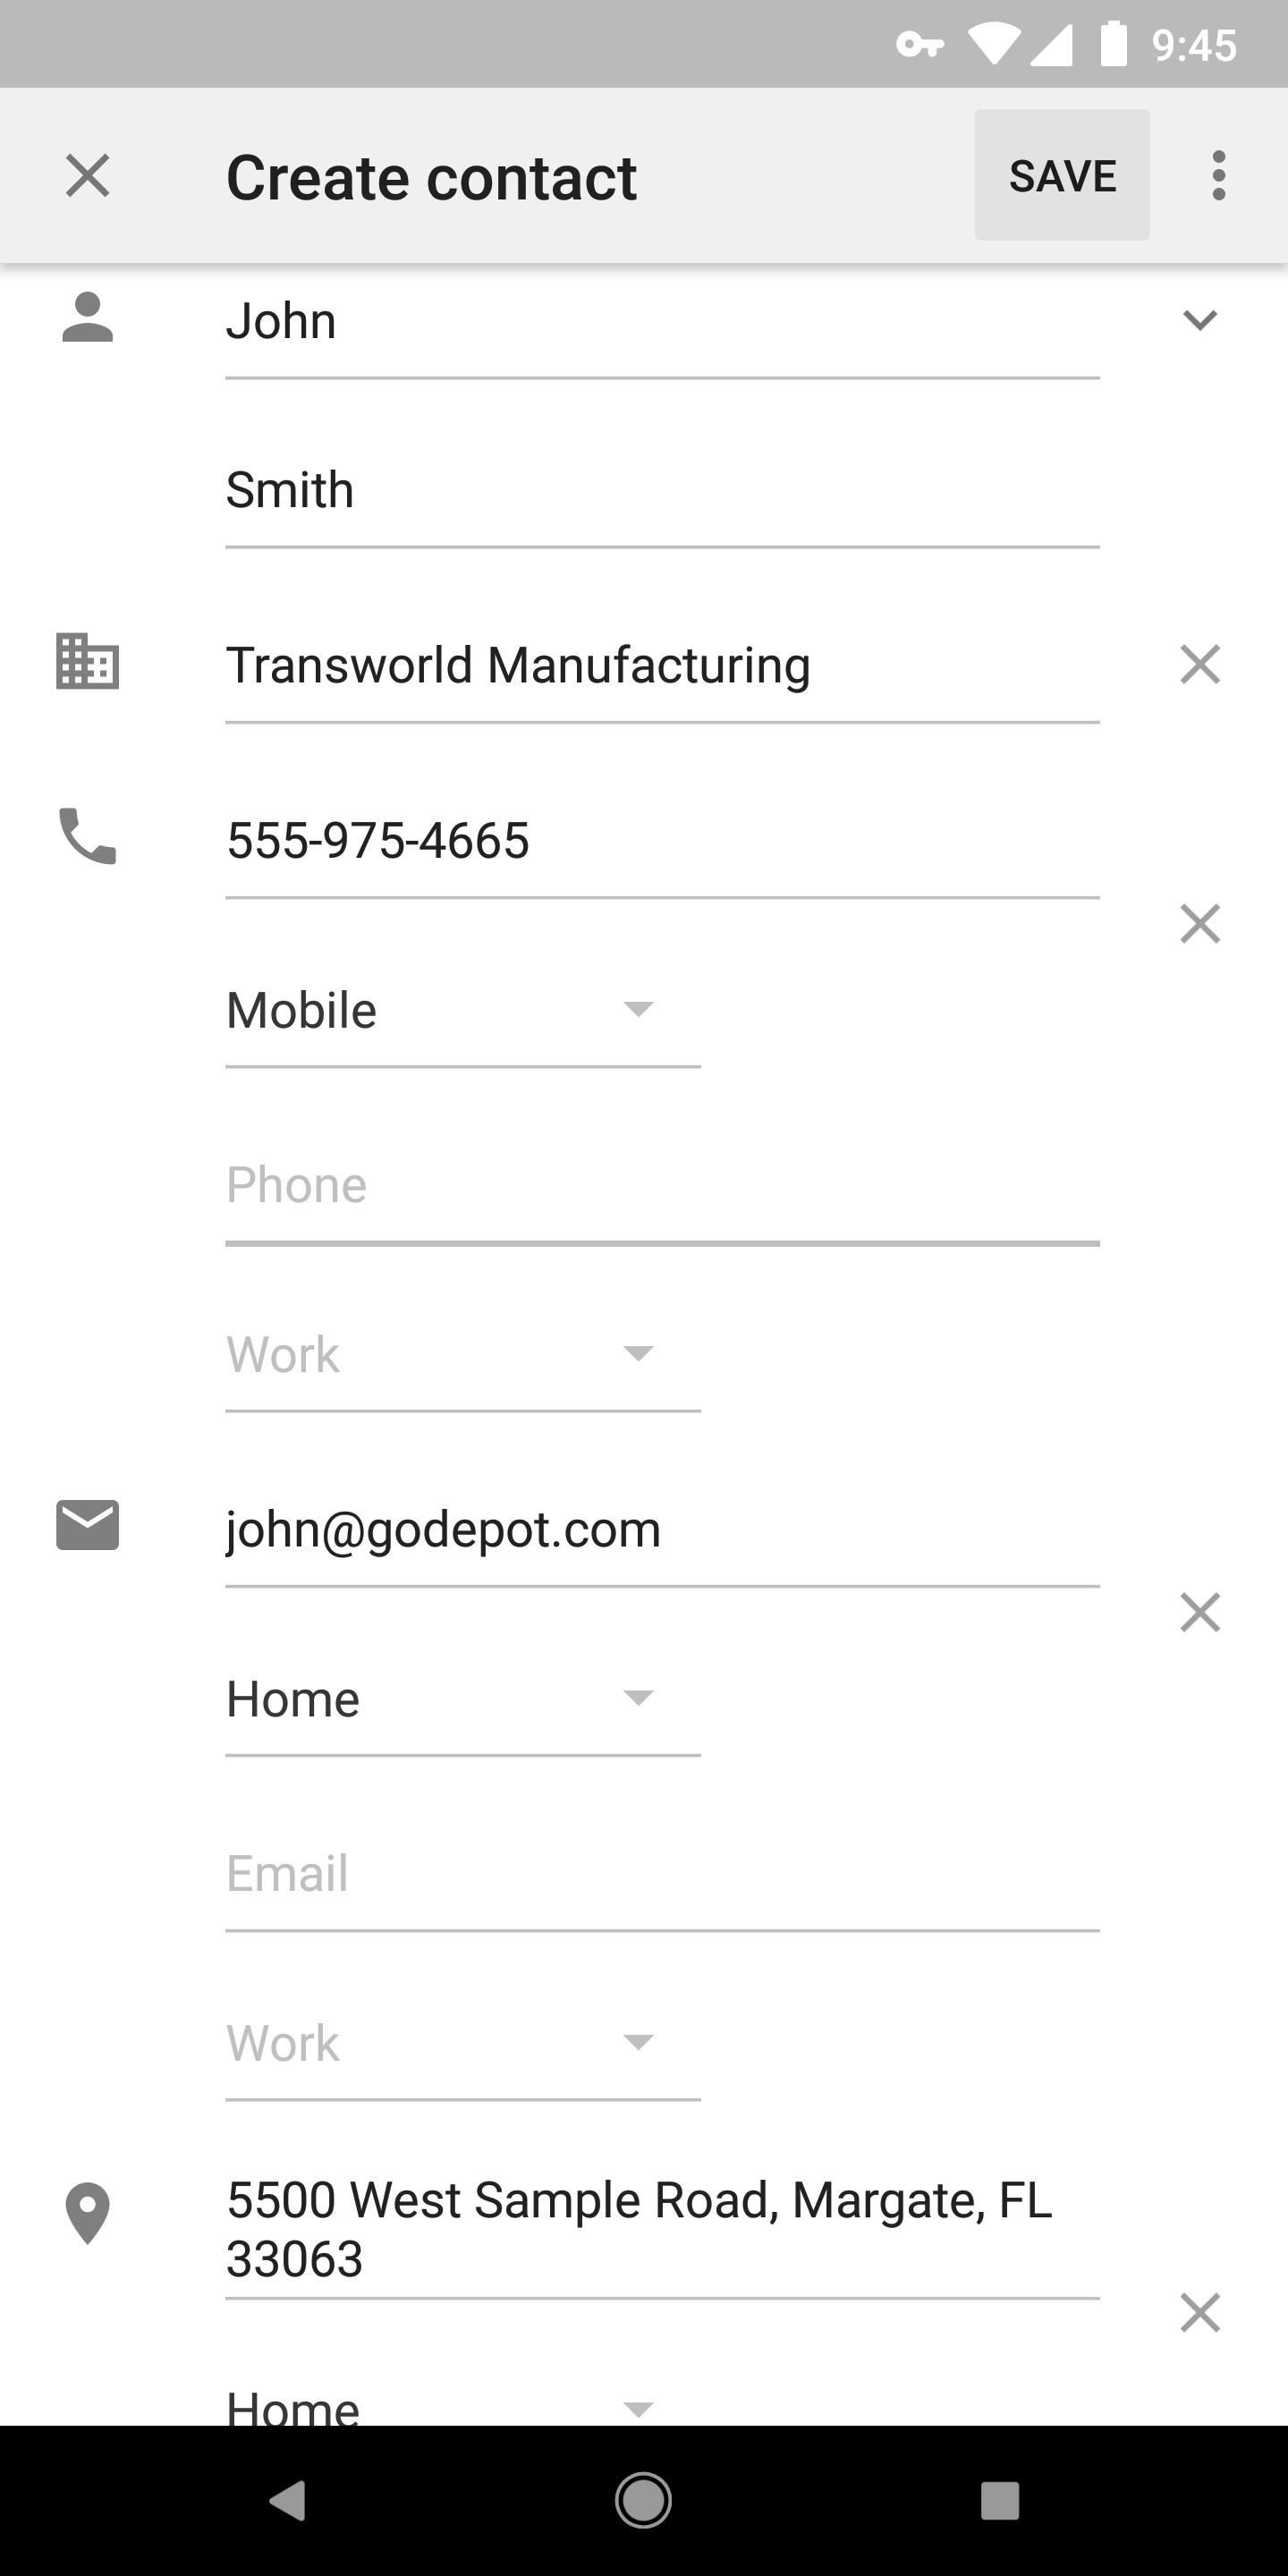 Google Photos 101: How to Use Google Lens to Save Contact Info from Business Cards